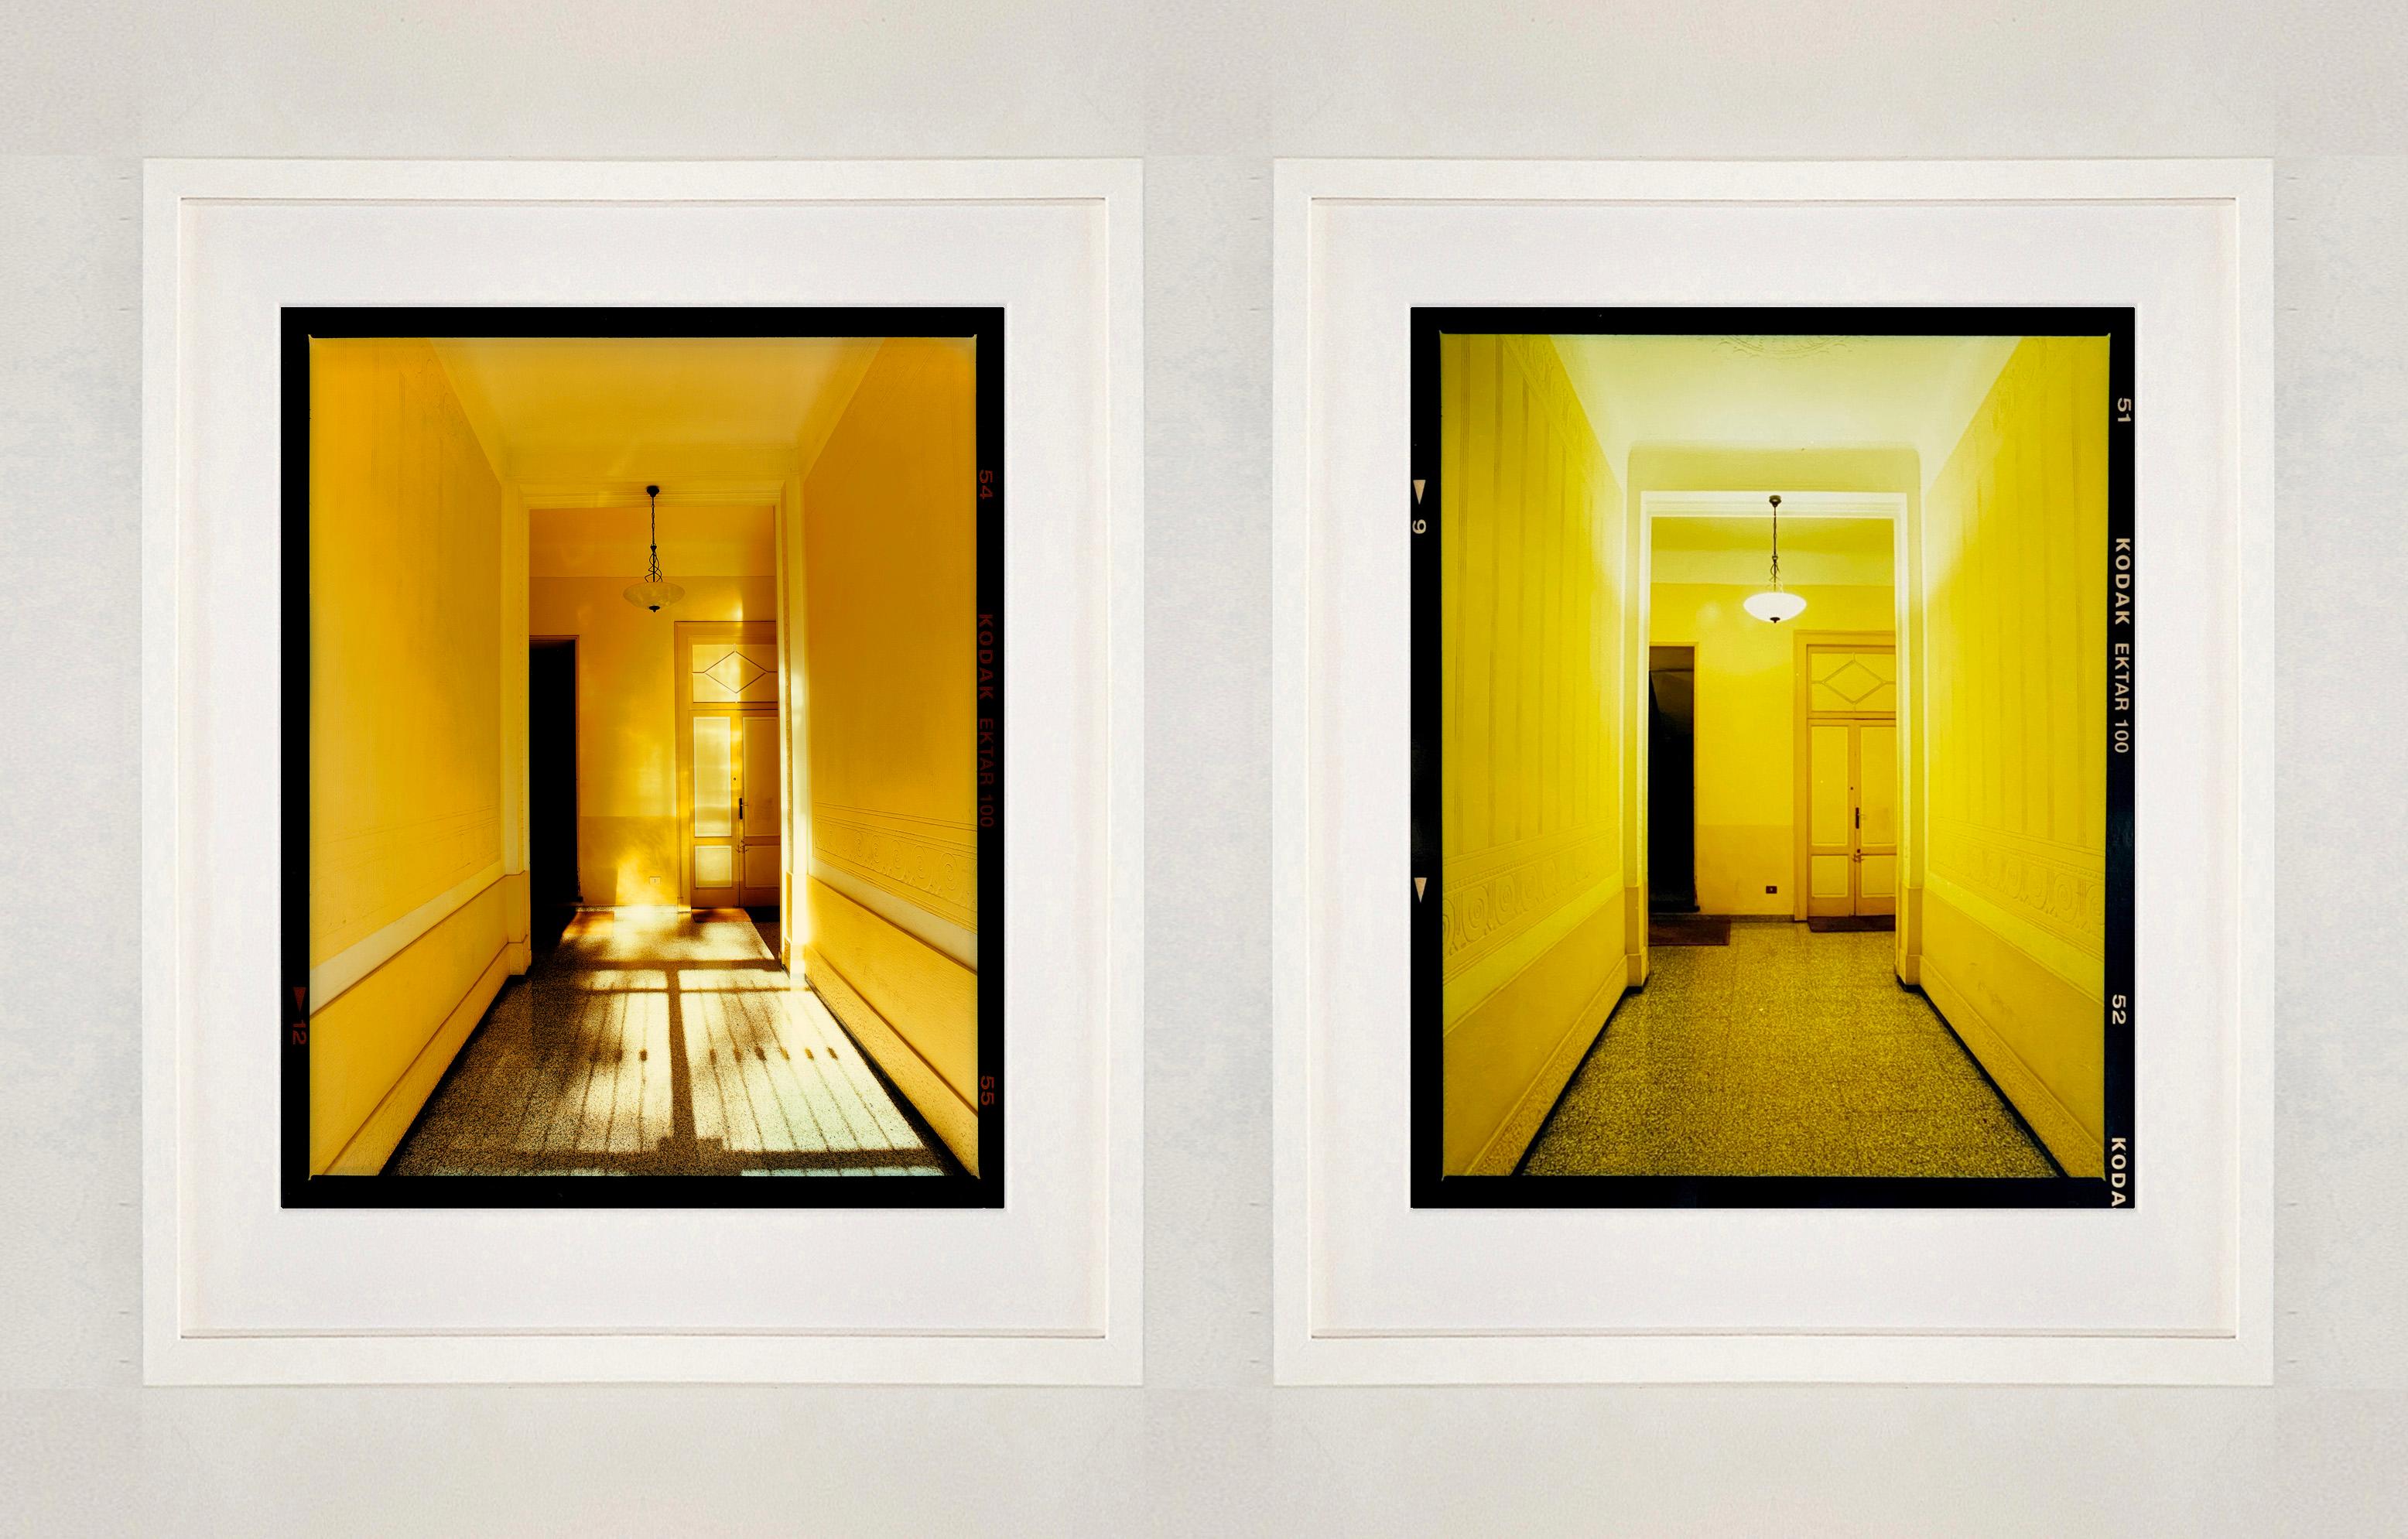 Yellow Corridor (Day), from Richard Heeps series A Short History of Milan which began as a special project for the 2018 Affordable Art Fair Milan. It was well received and the artwork has become popular with art buyers around the world. Richard